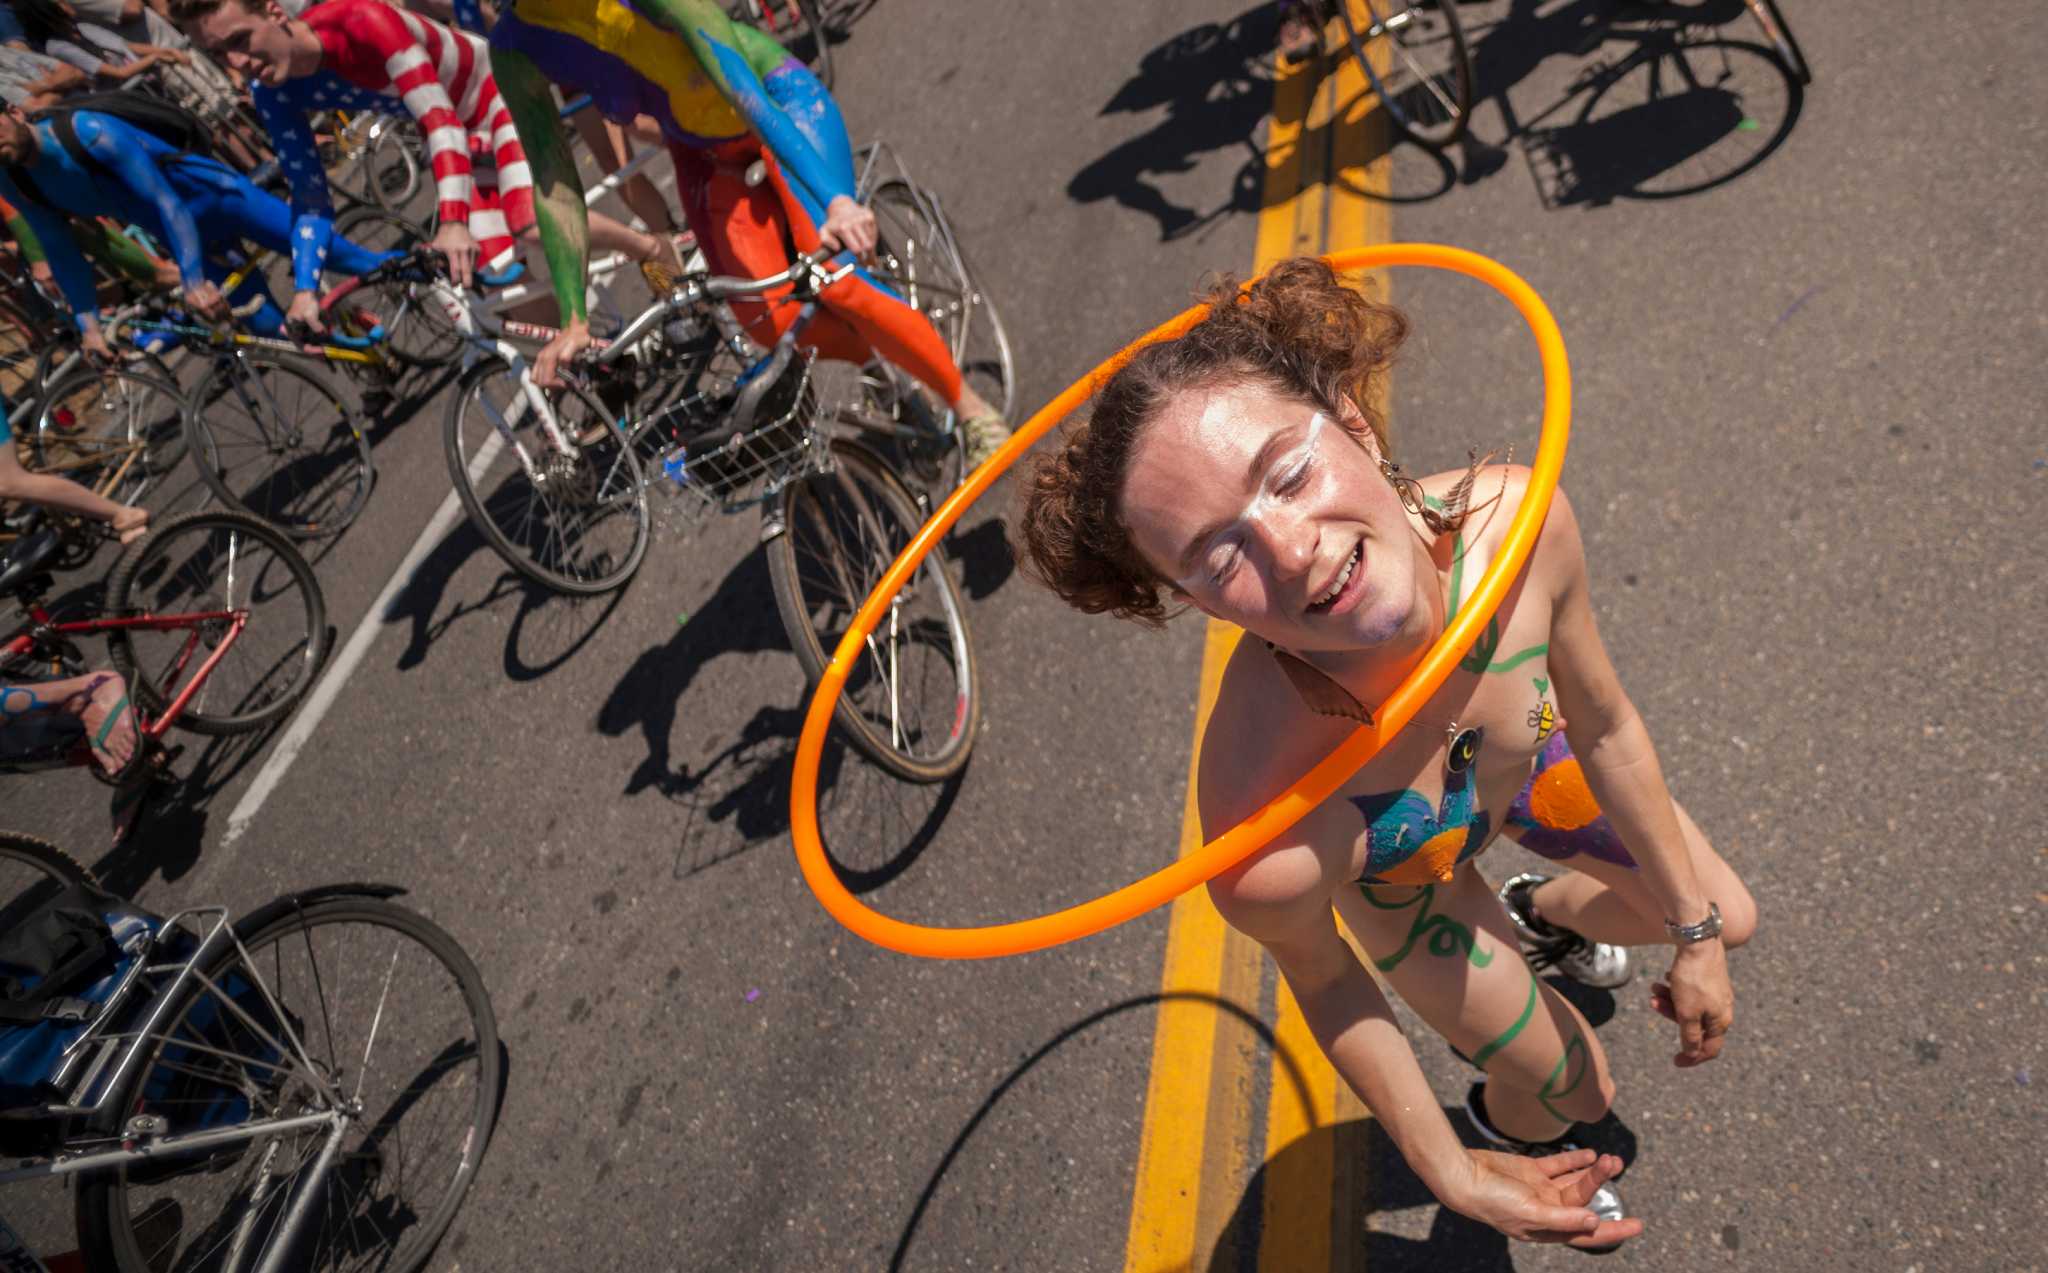 Fremont's Solstice Parade and naked bike ride through the years